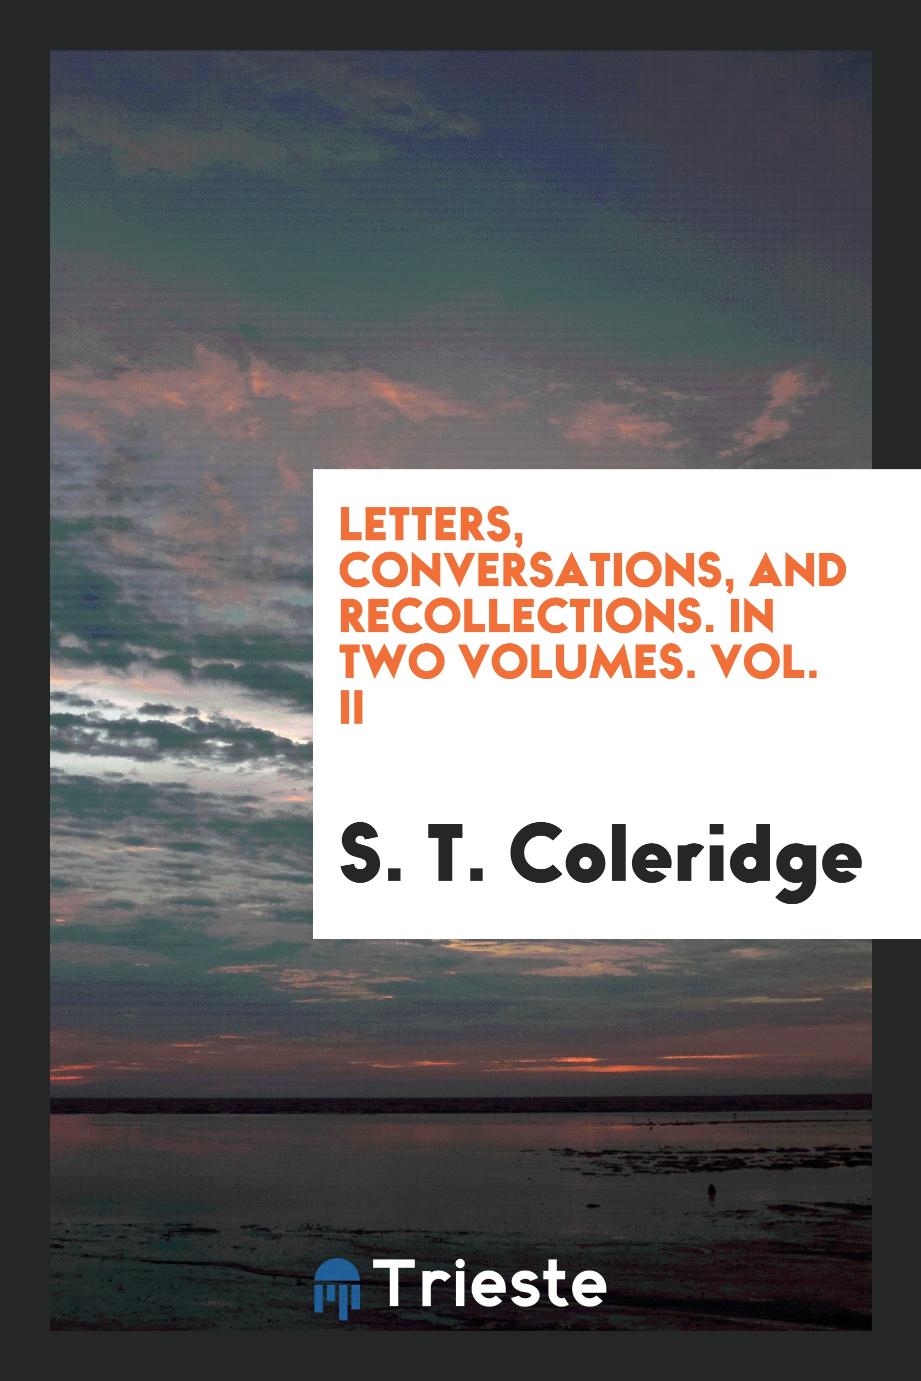 Letters, conversations, and recollections. In two volumes. Vol. II